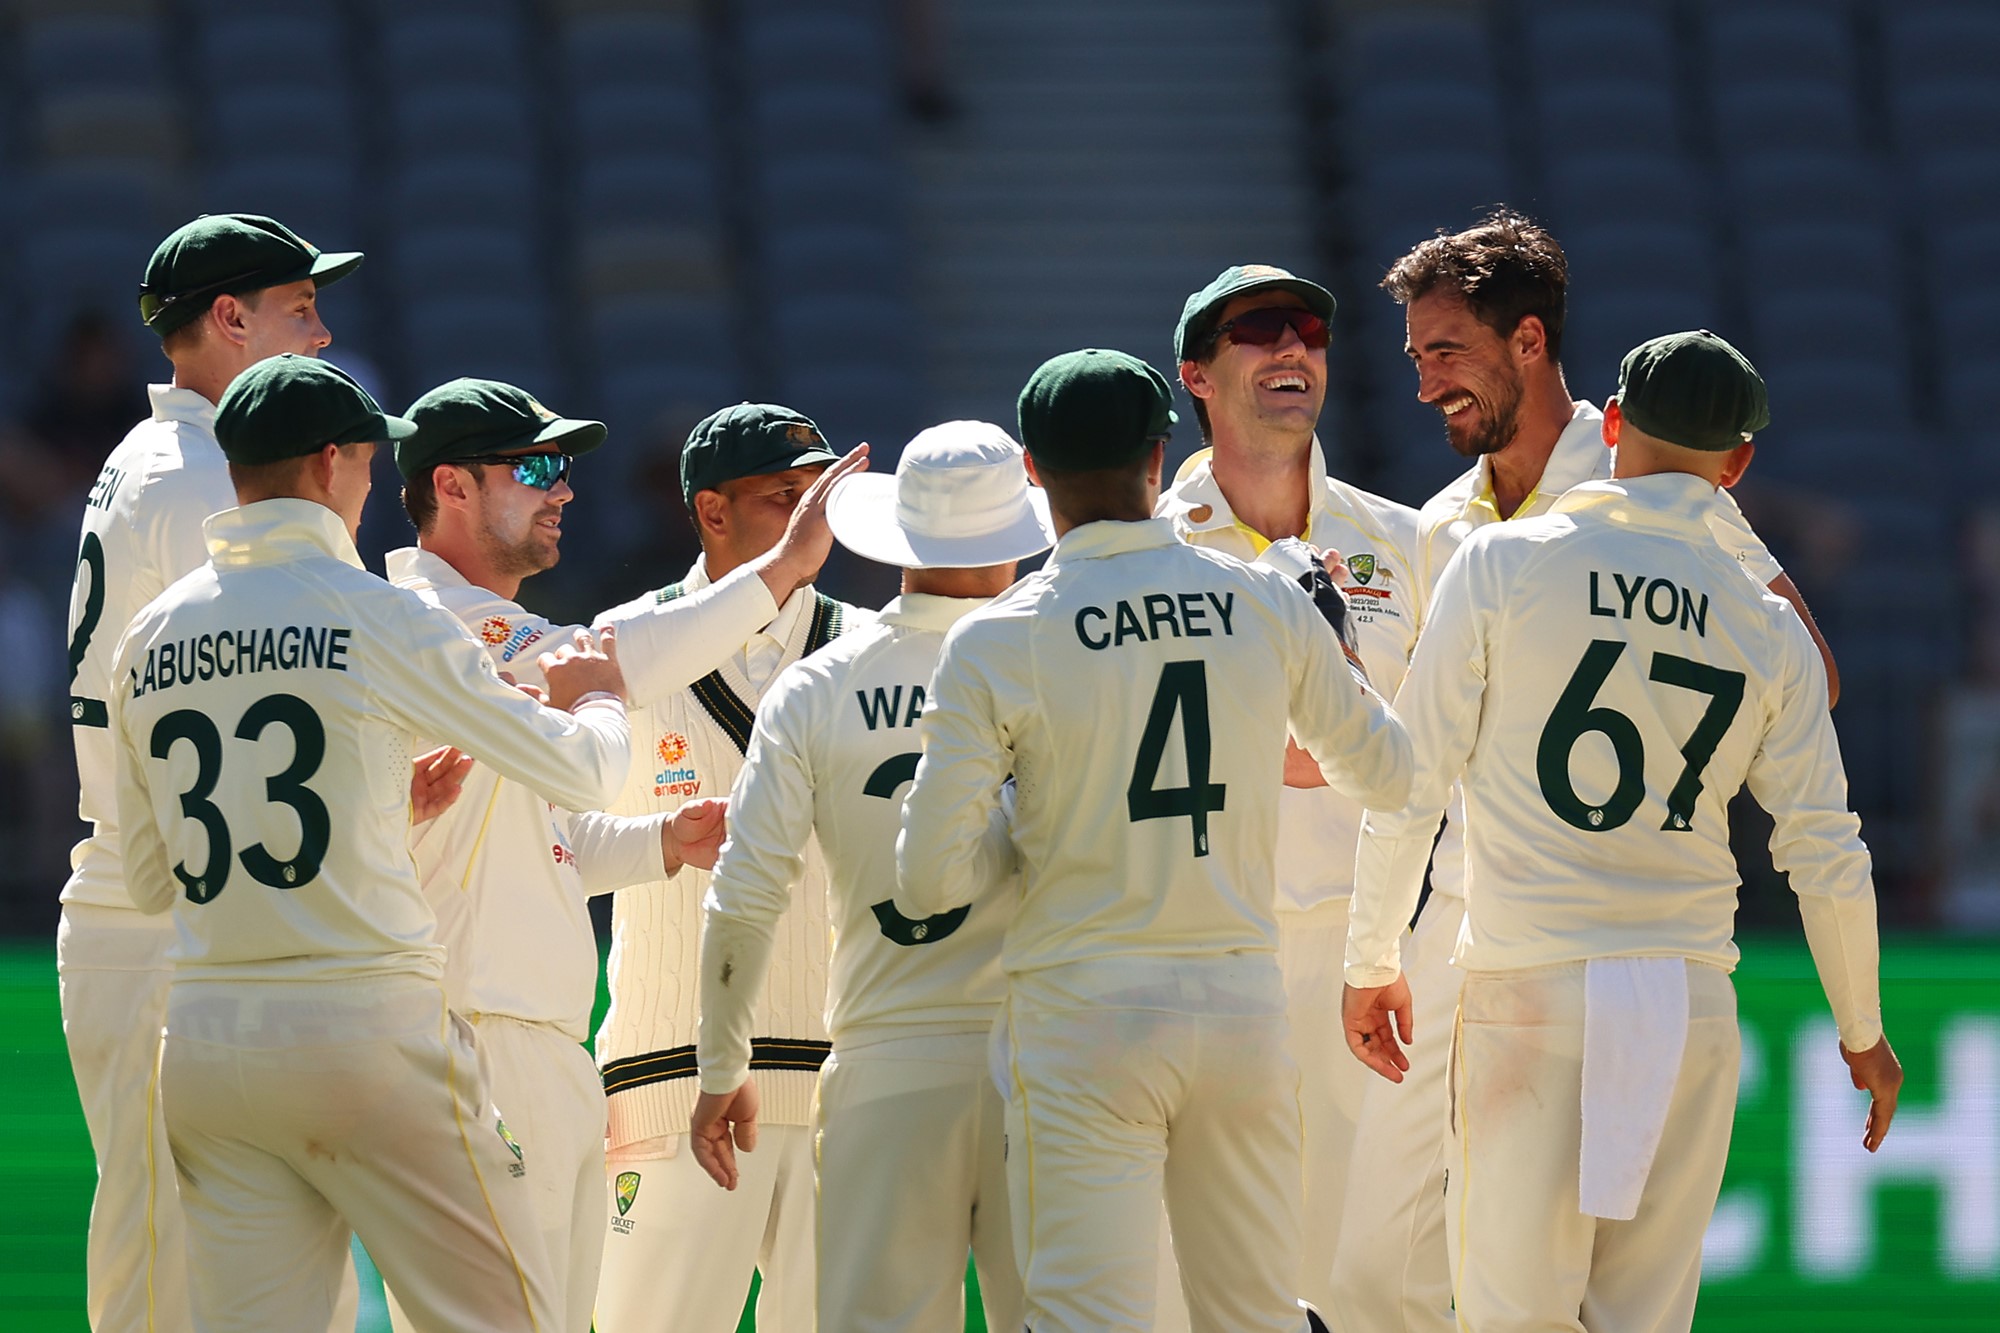 Australian Test cricket players gather around in celebration during a Test against West Indies in Perth.